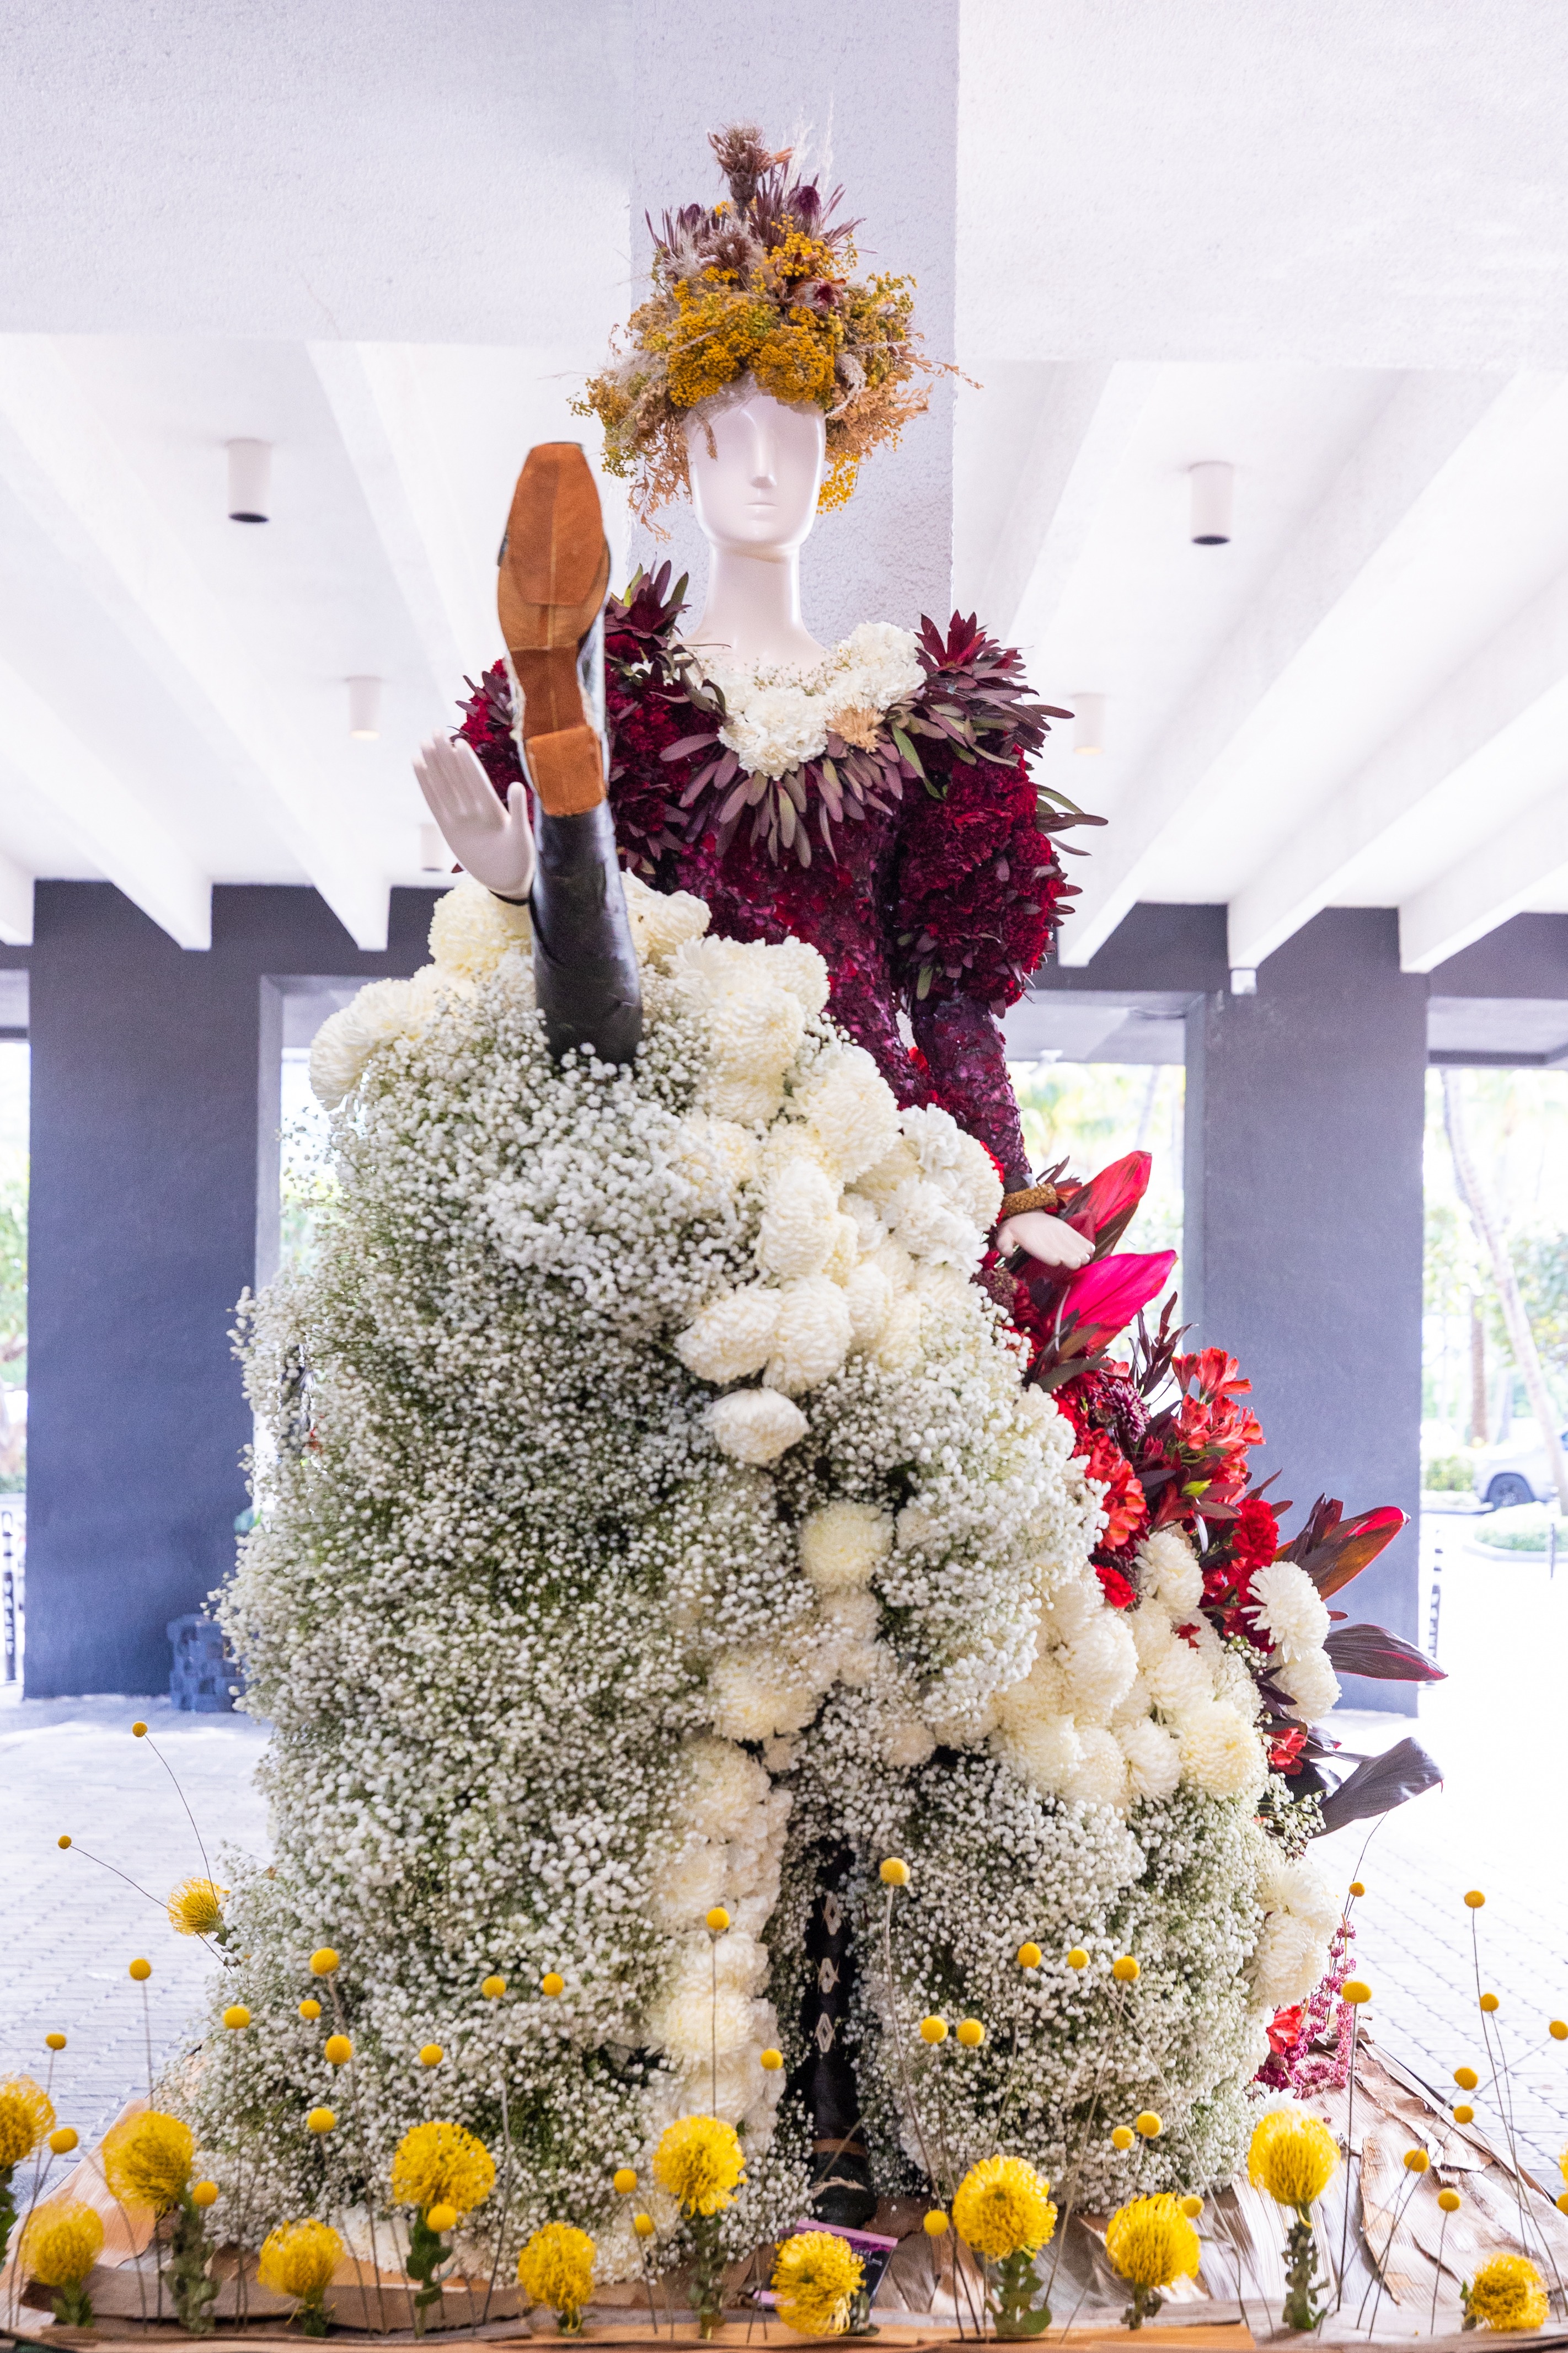 Floral mannequin inspired by La Goule